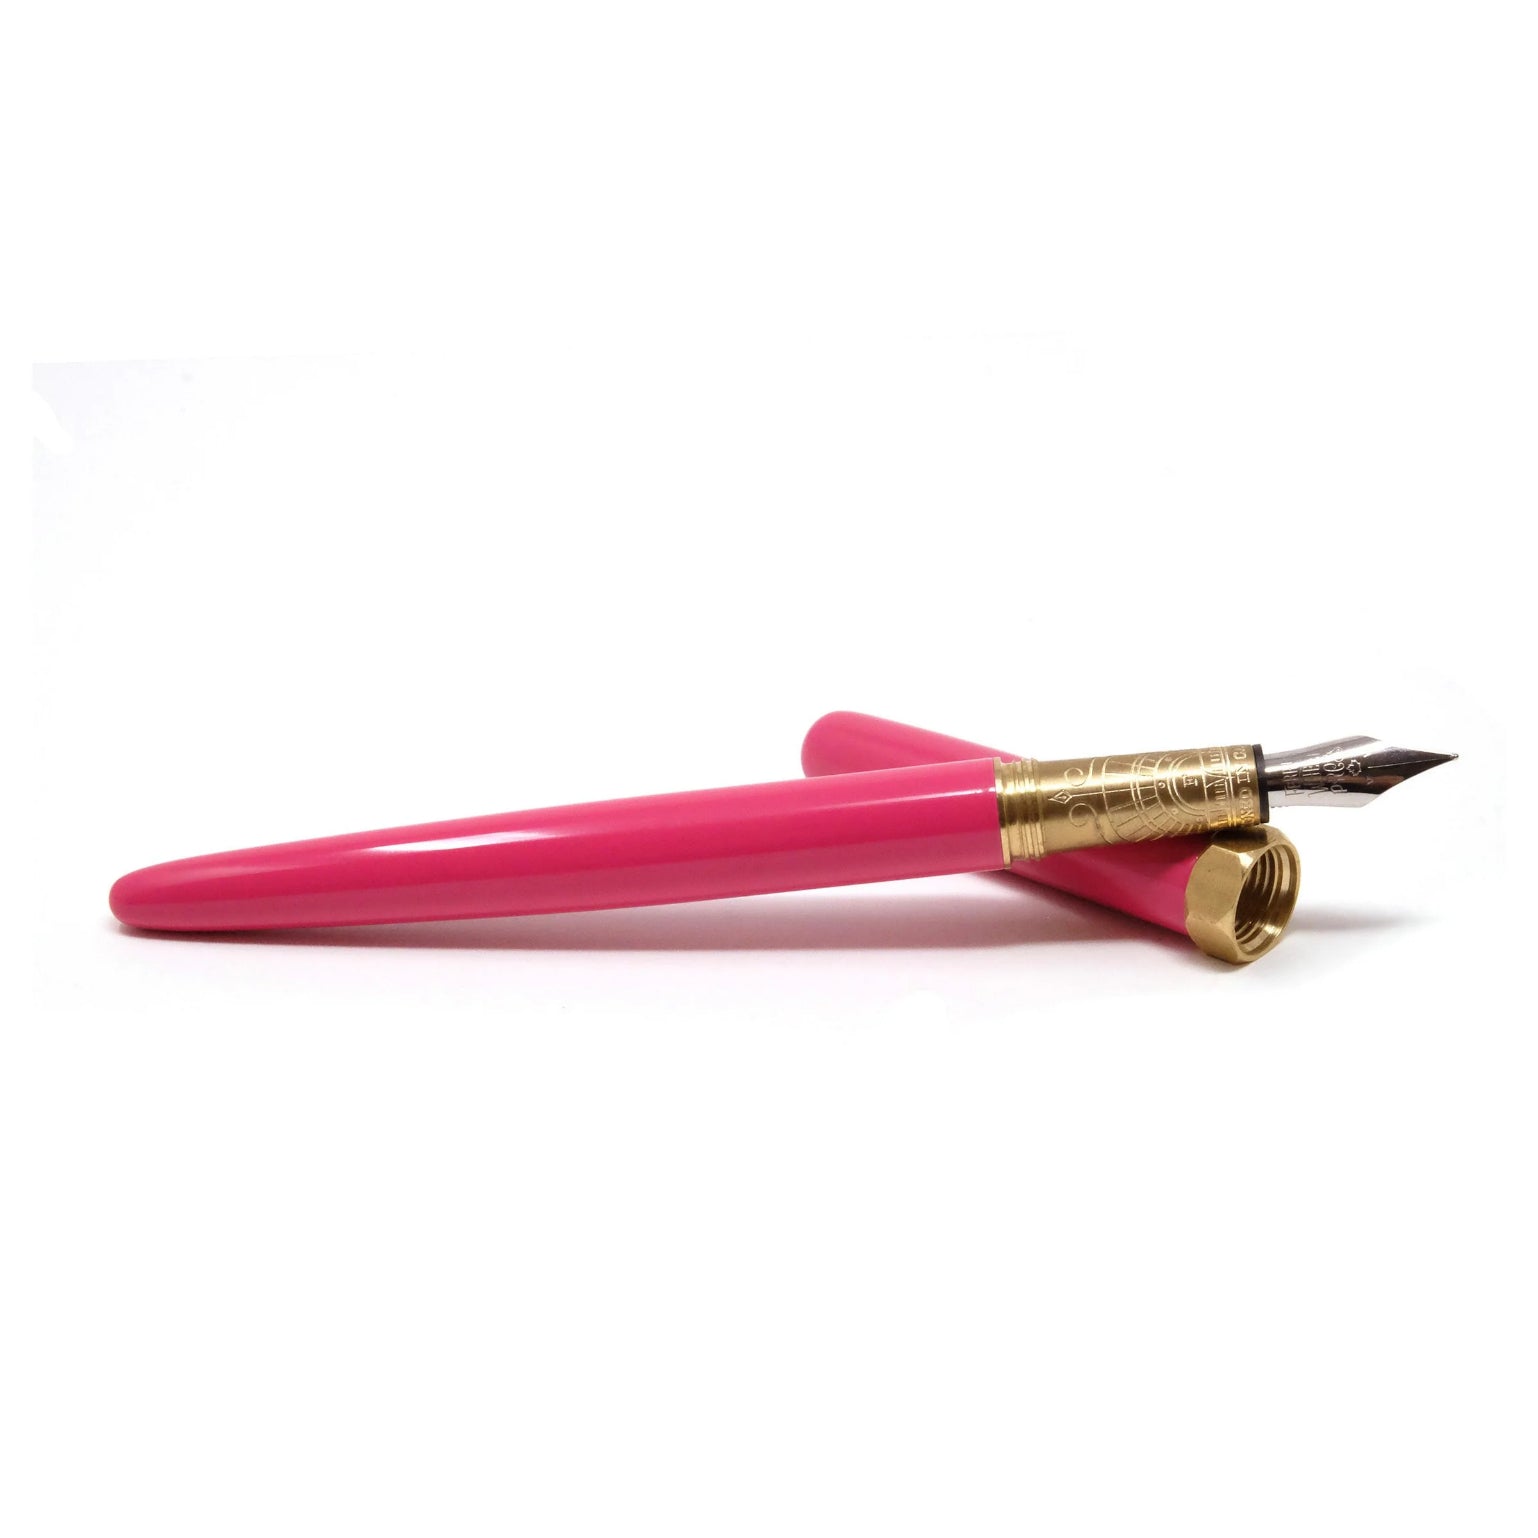 FERRIS WHEEL PRESS Brush Fountain Pen-F Piccadilly Pink Default Title